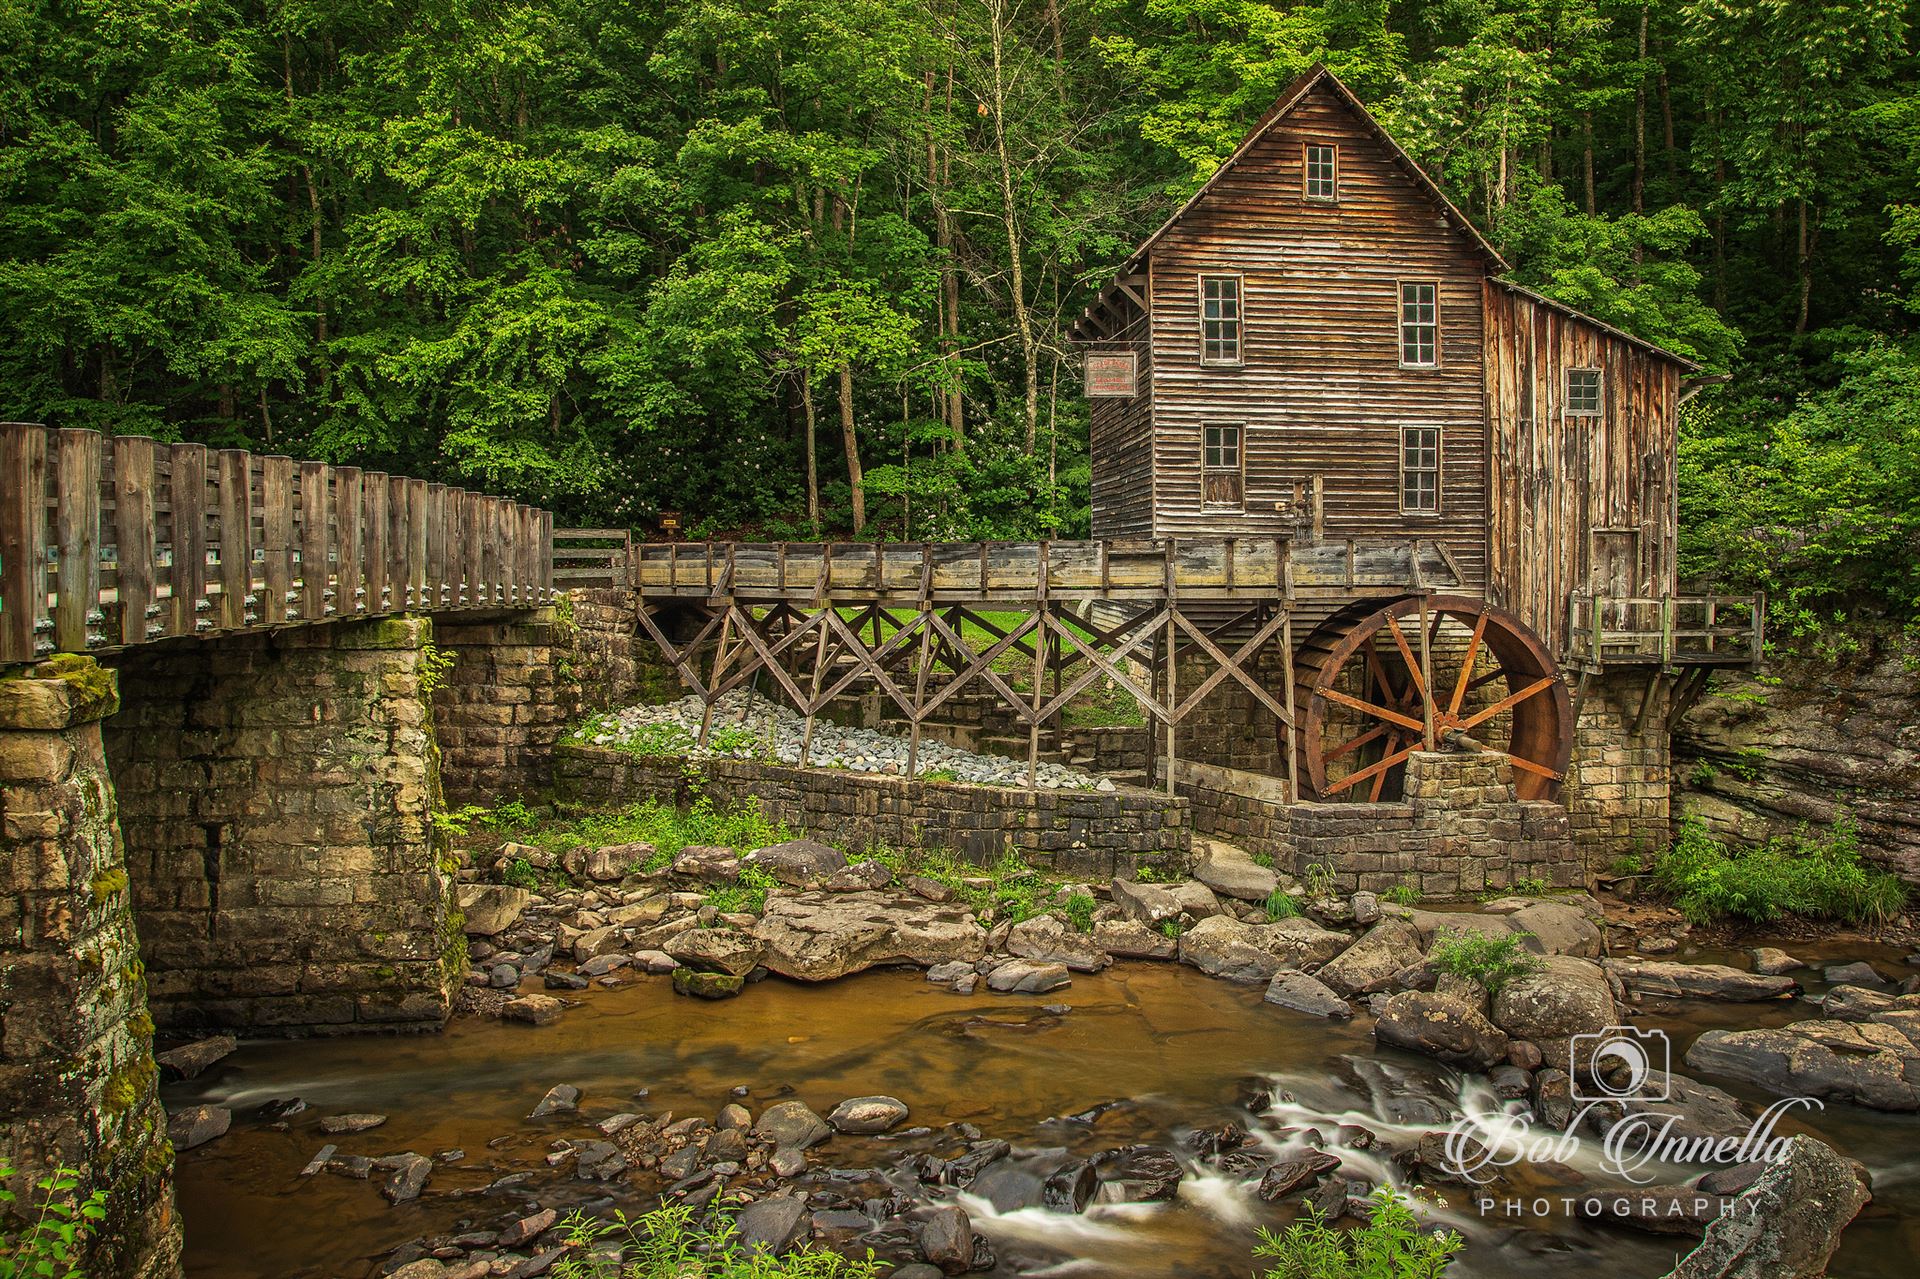 Glade Creek Grist Mill Grist Mill in Babcock State Park, West Virginia by Buckmaster